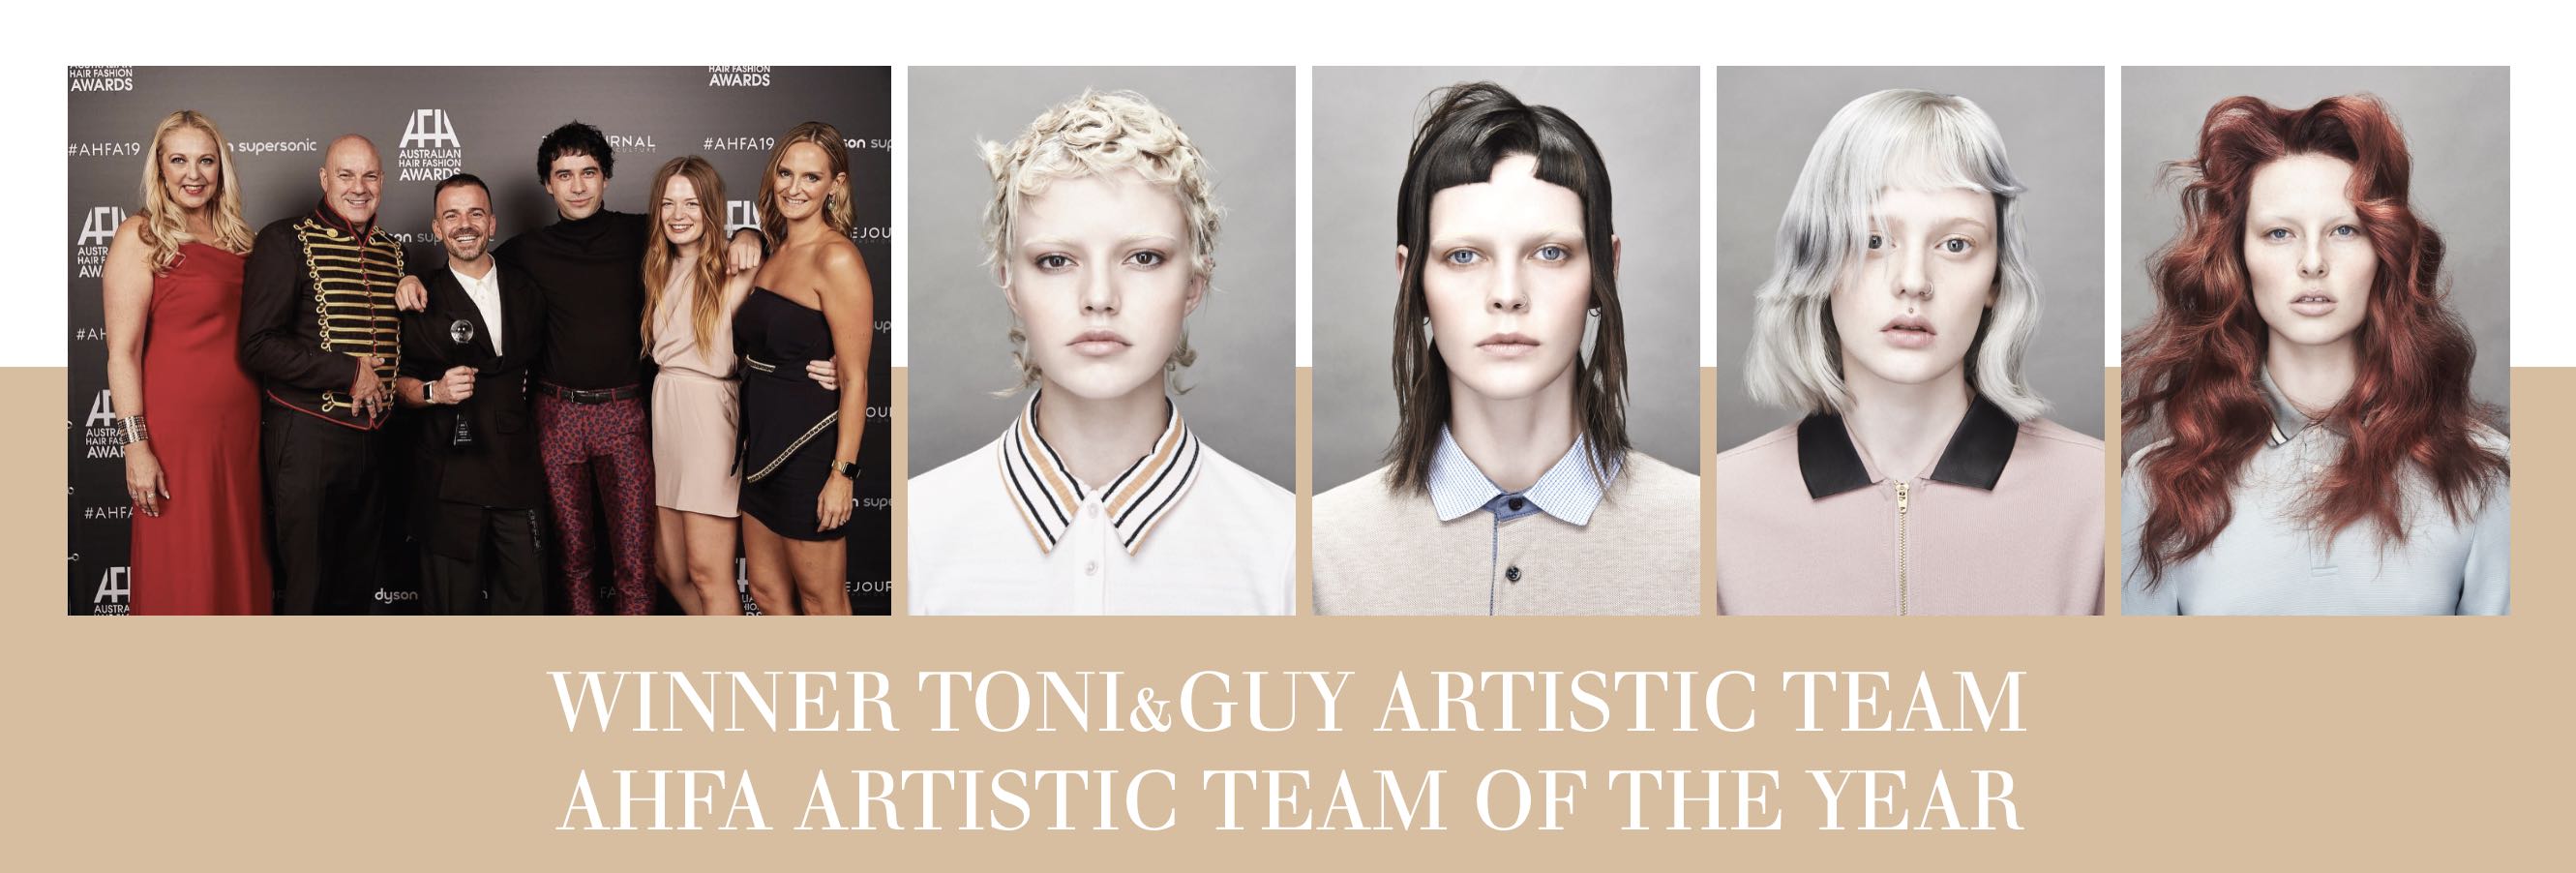 Congratulations to the 2019 AHFA Artistic Team of the Year, the TONI&GUY ARTISTIC TEAM